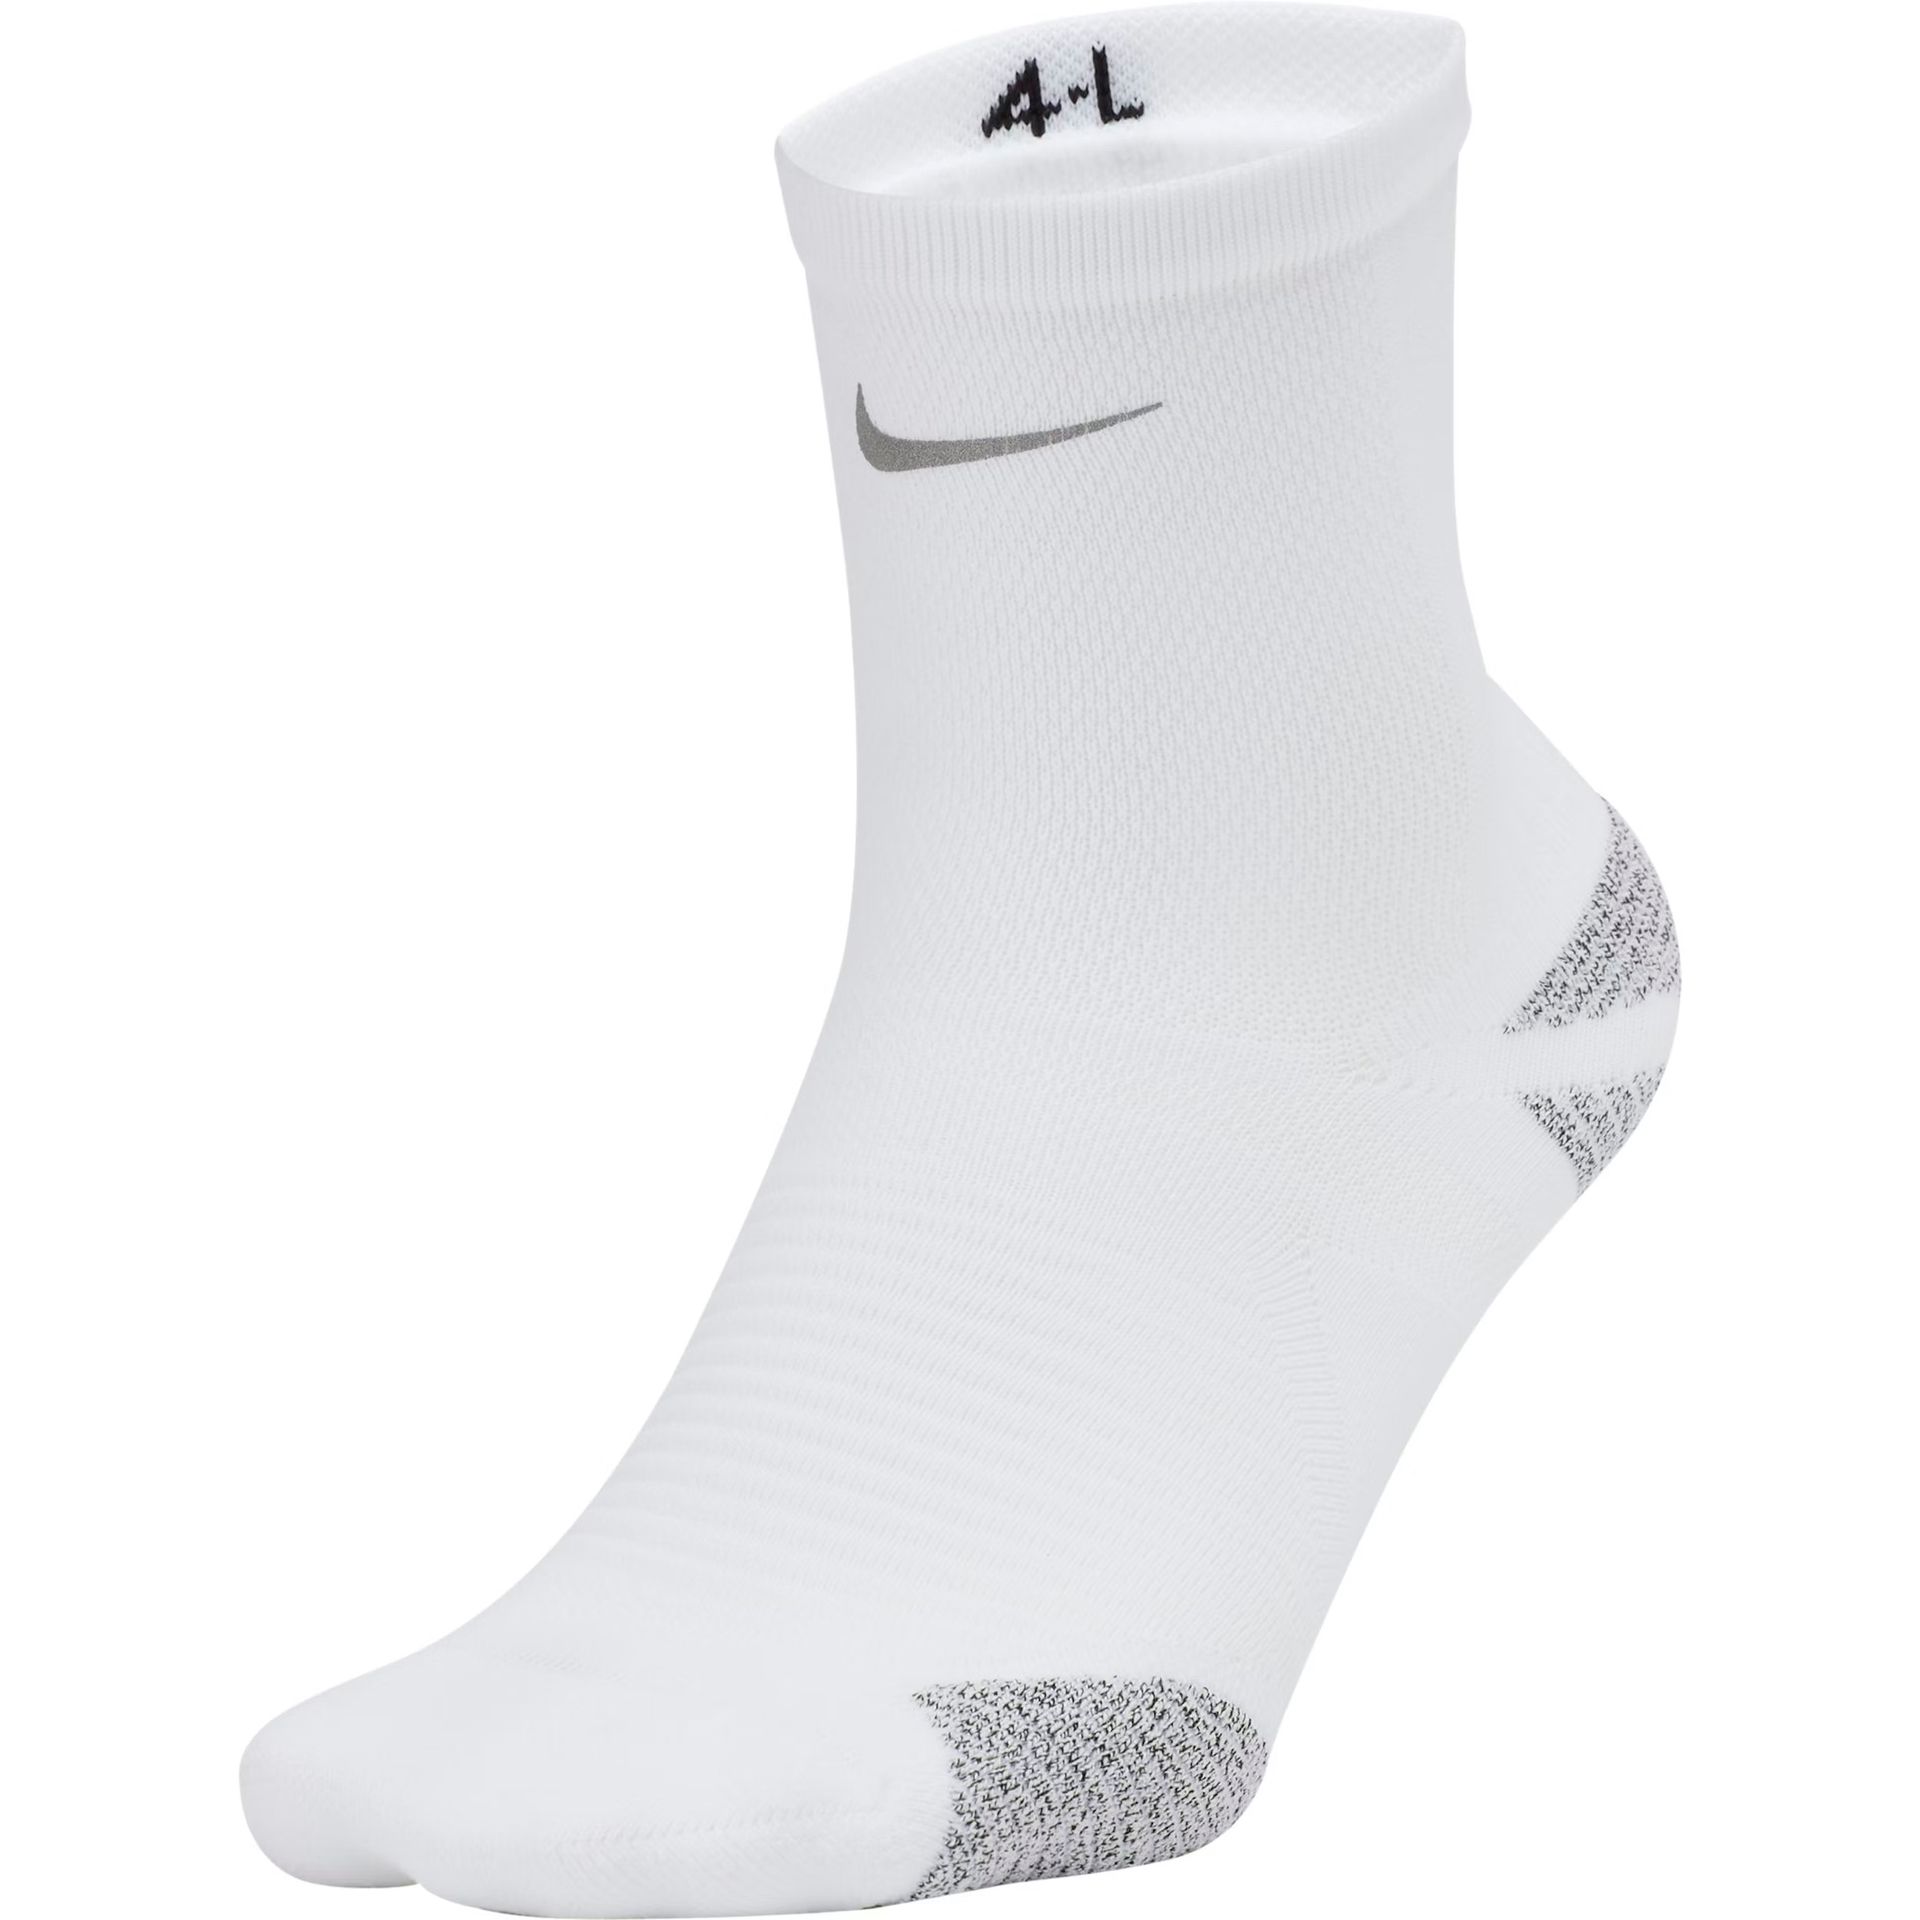 A pair of white nike socks with the number 4 on them